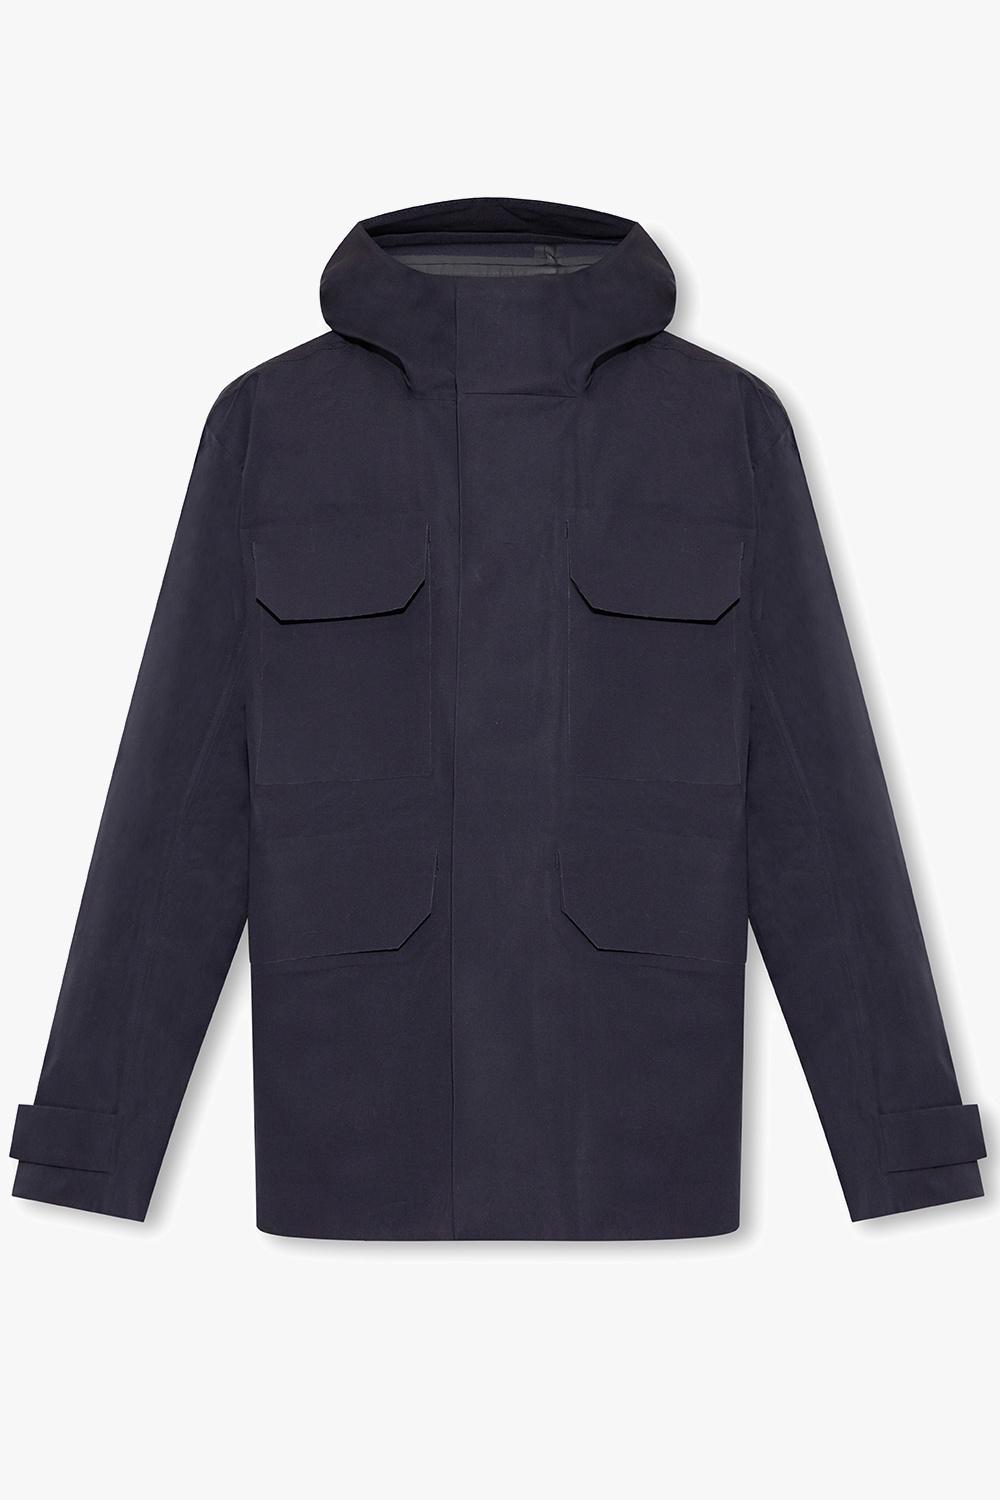 Norse Projects 'nunk' Jacket in Blue for Men | Lyst UK